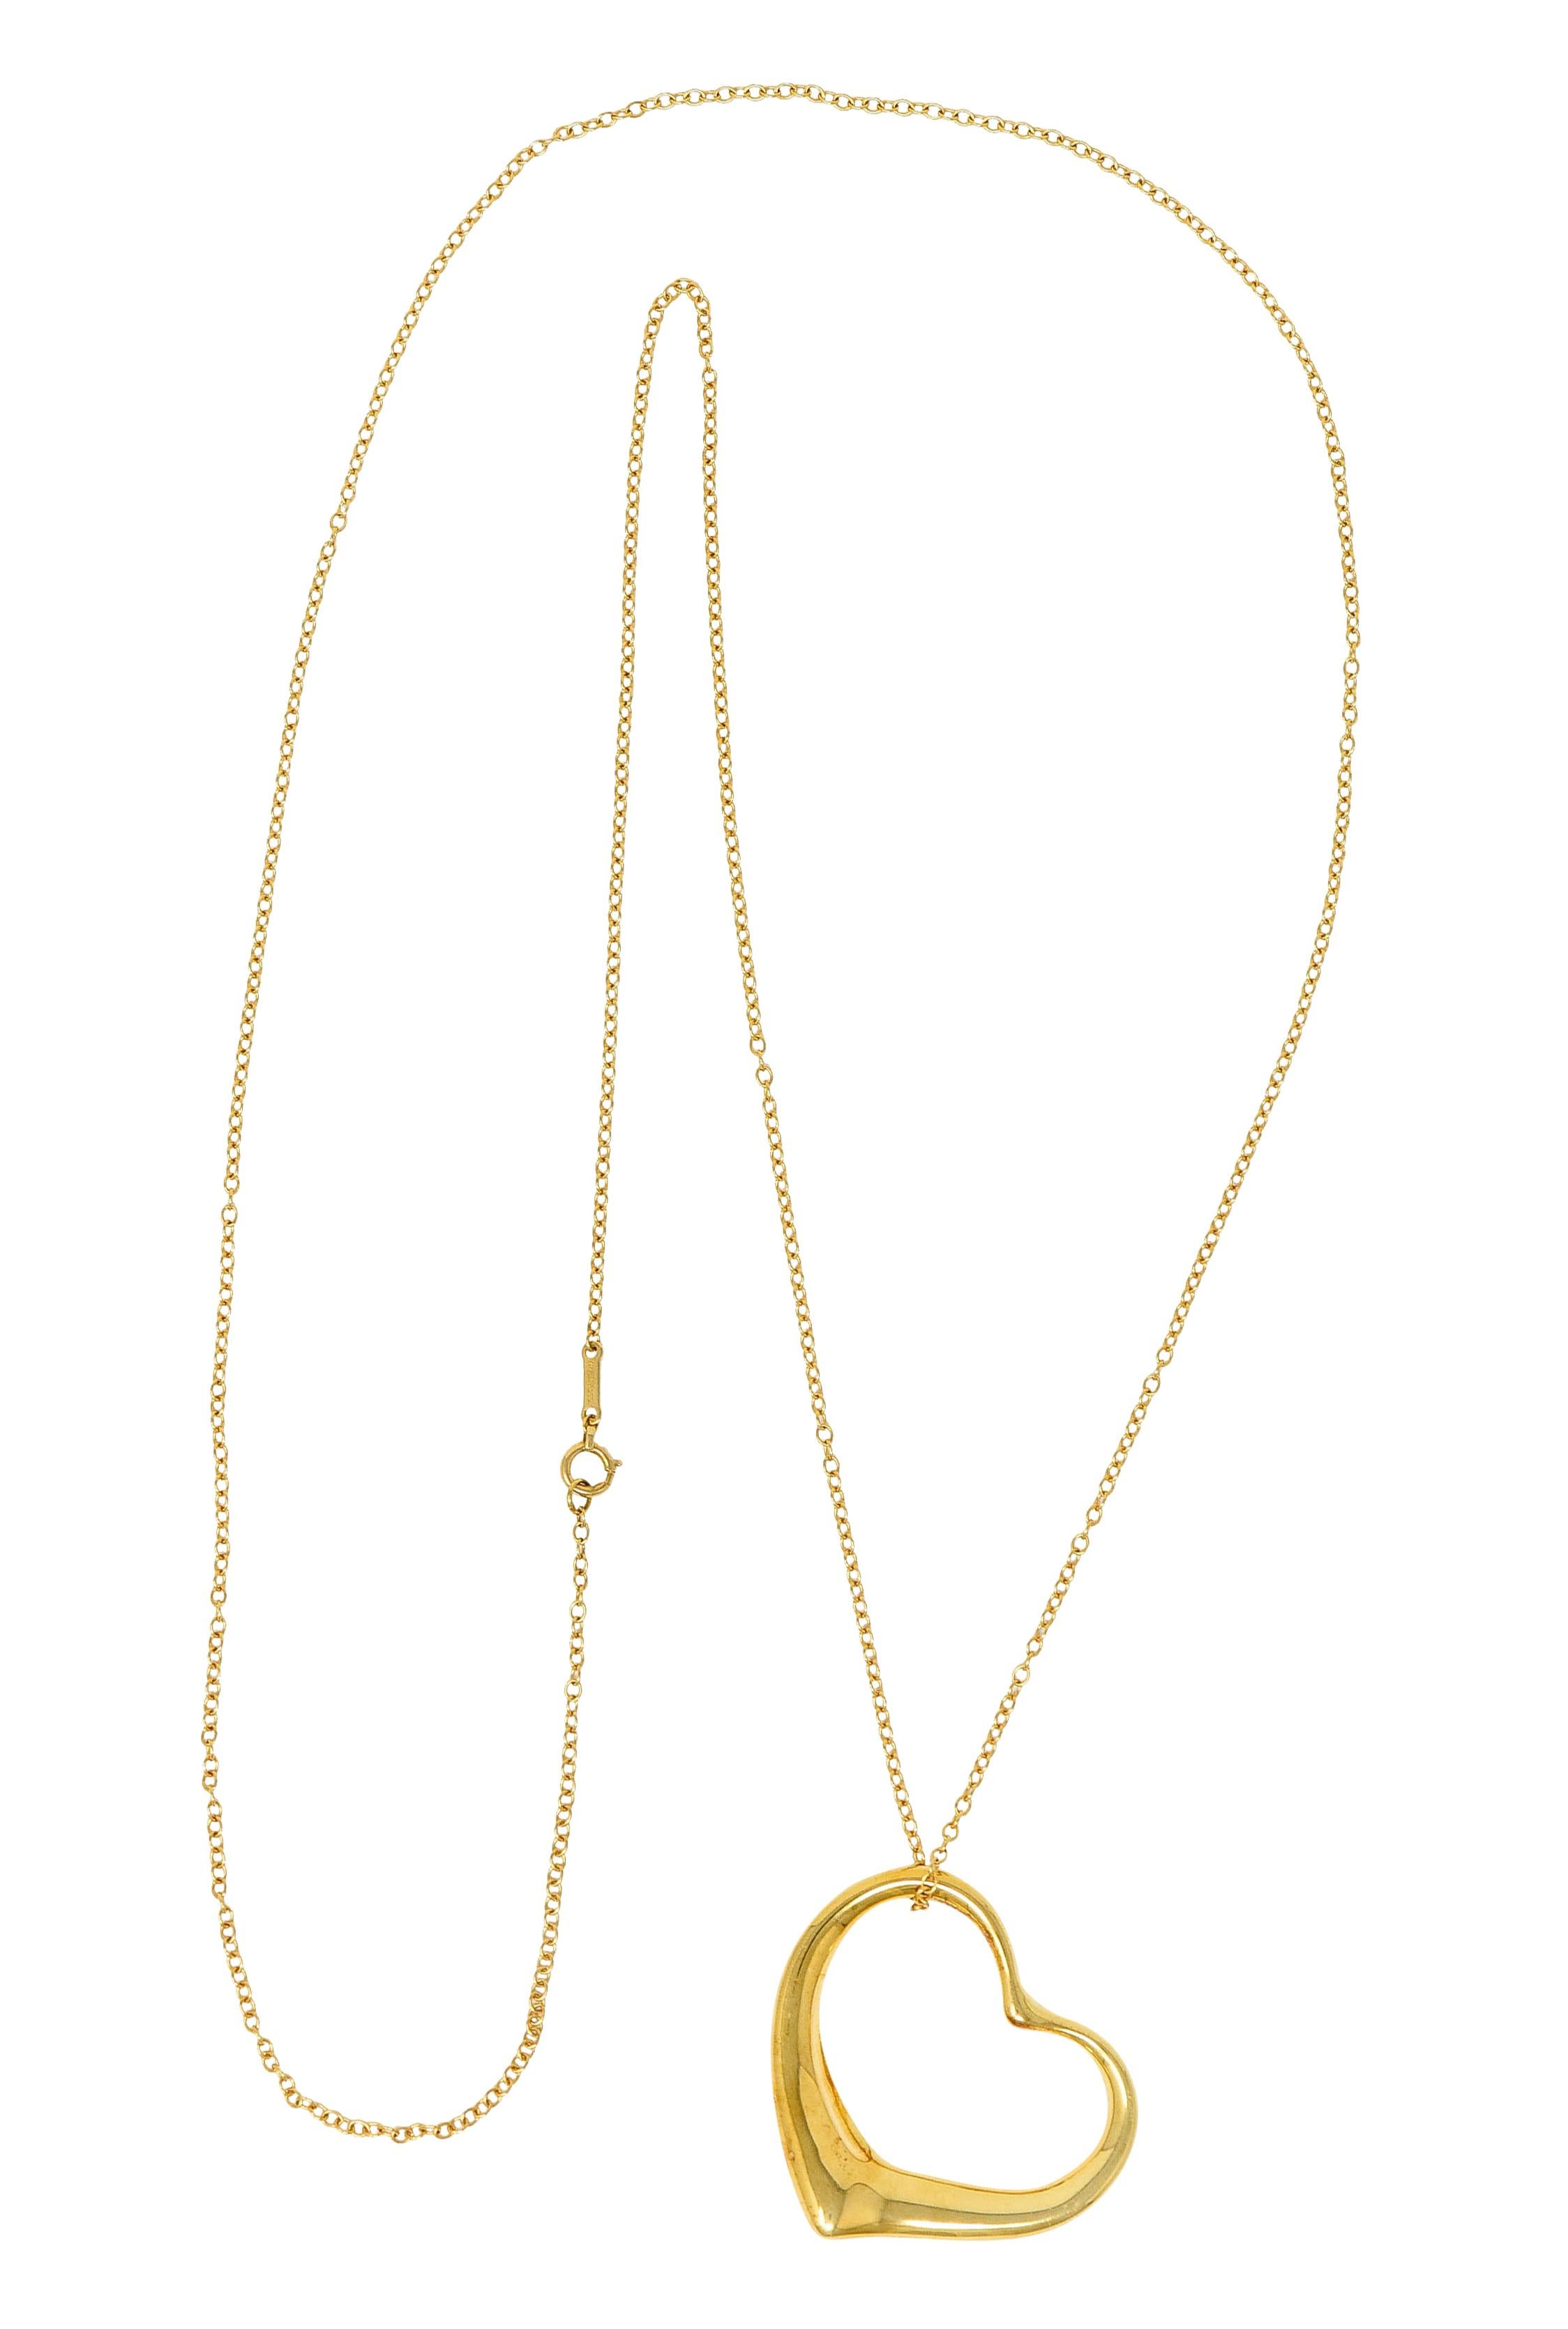 Pendant designed as polished gold open heart motif

Suspending from a classic gold cable chain completed by a spring ring clasp

Both are signed Tiffany & Co. Peretti Spain

Both stamped 750 for 18 karat gold

From the Open Heart collection, circa